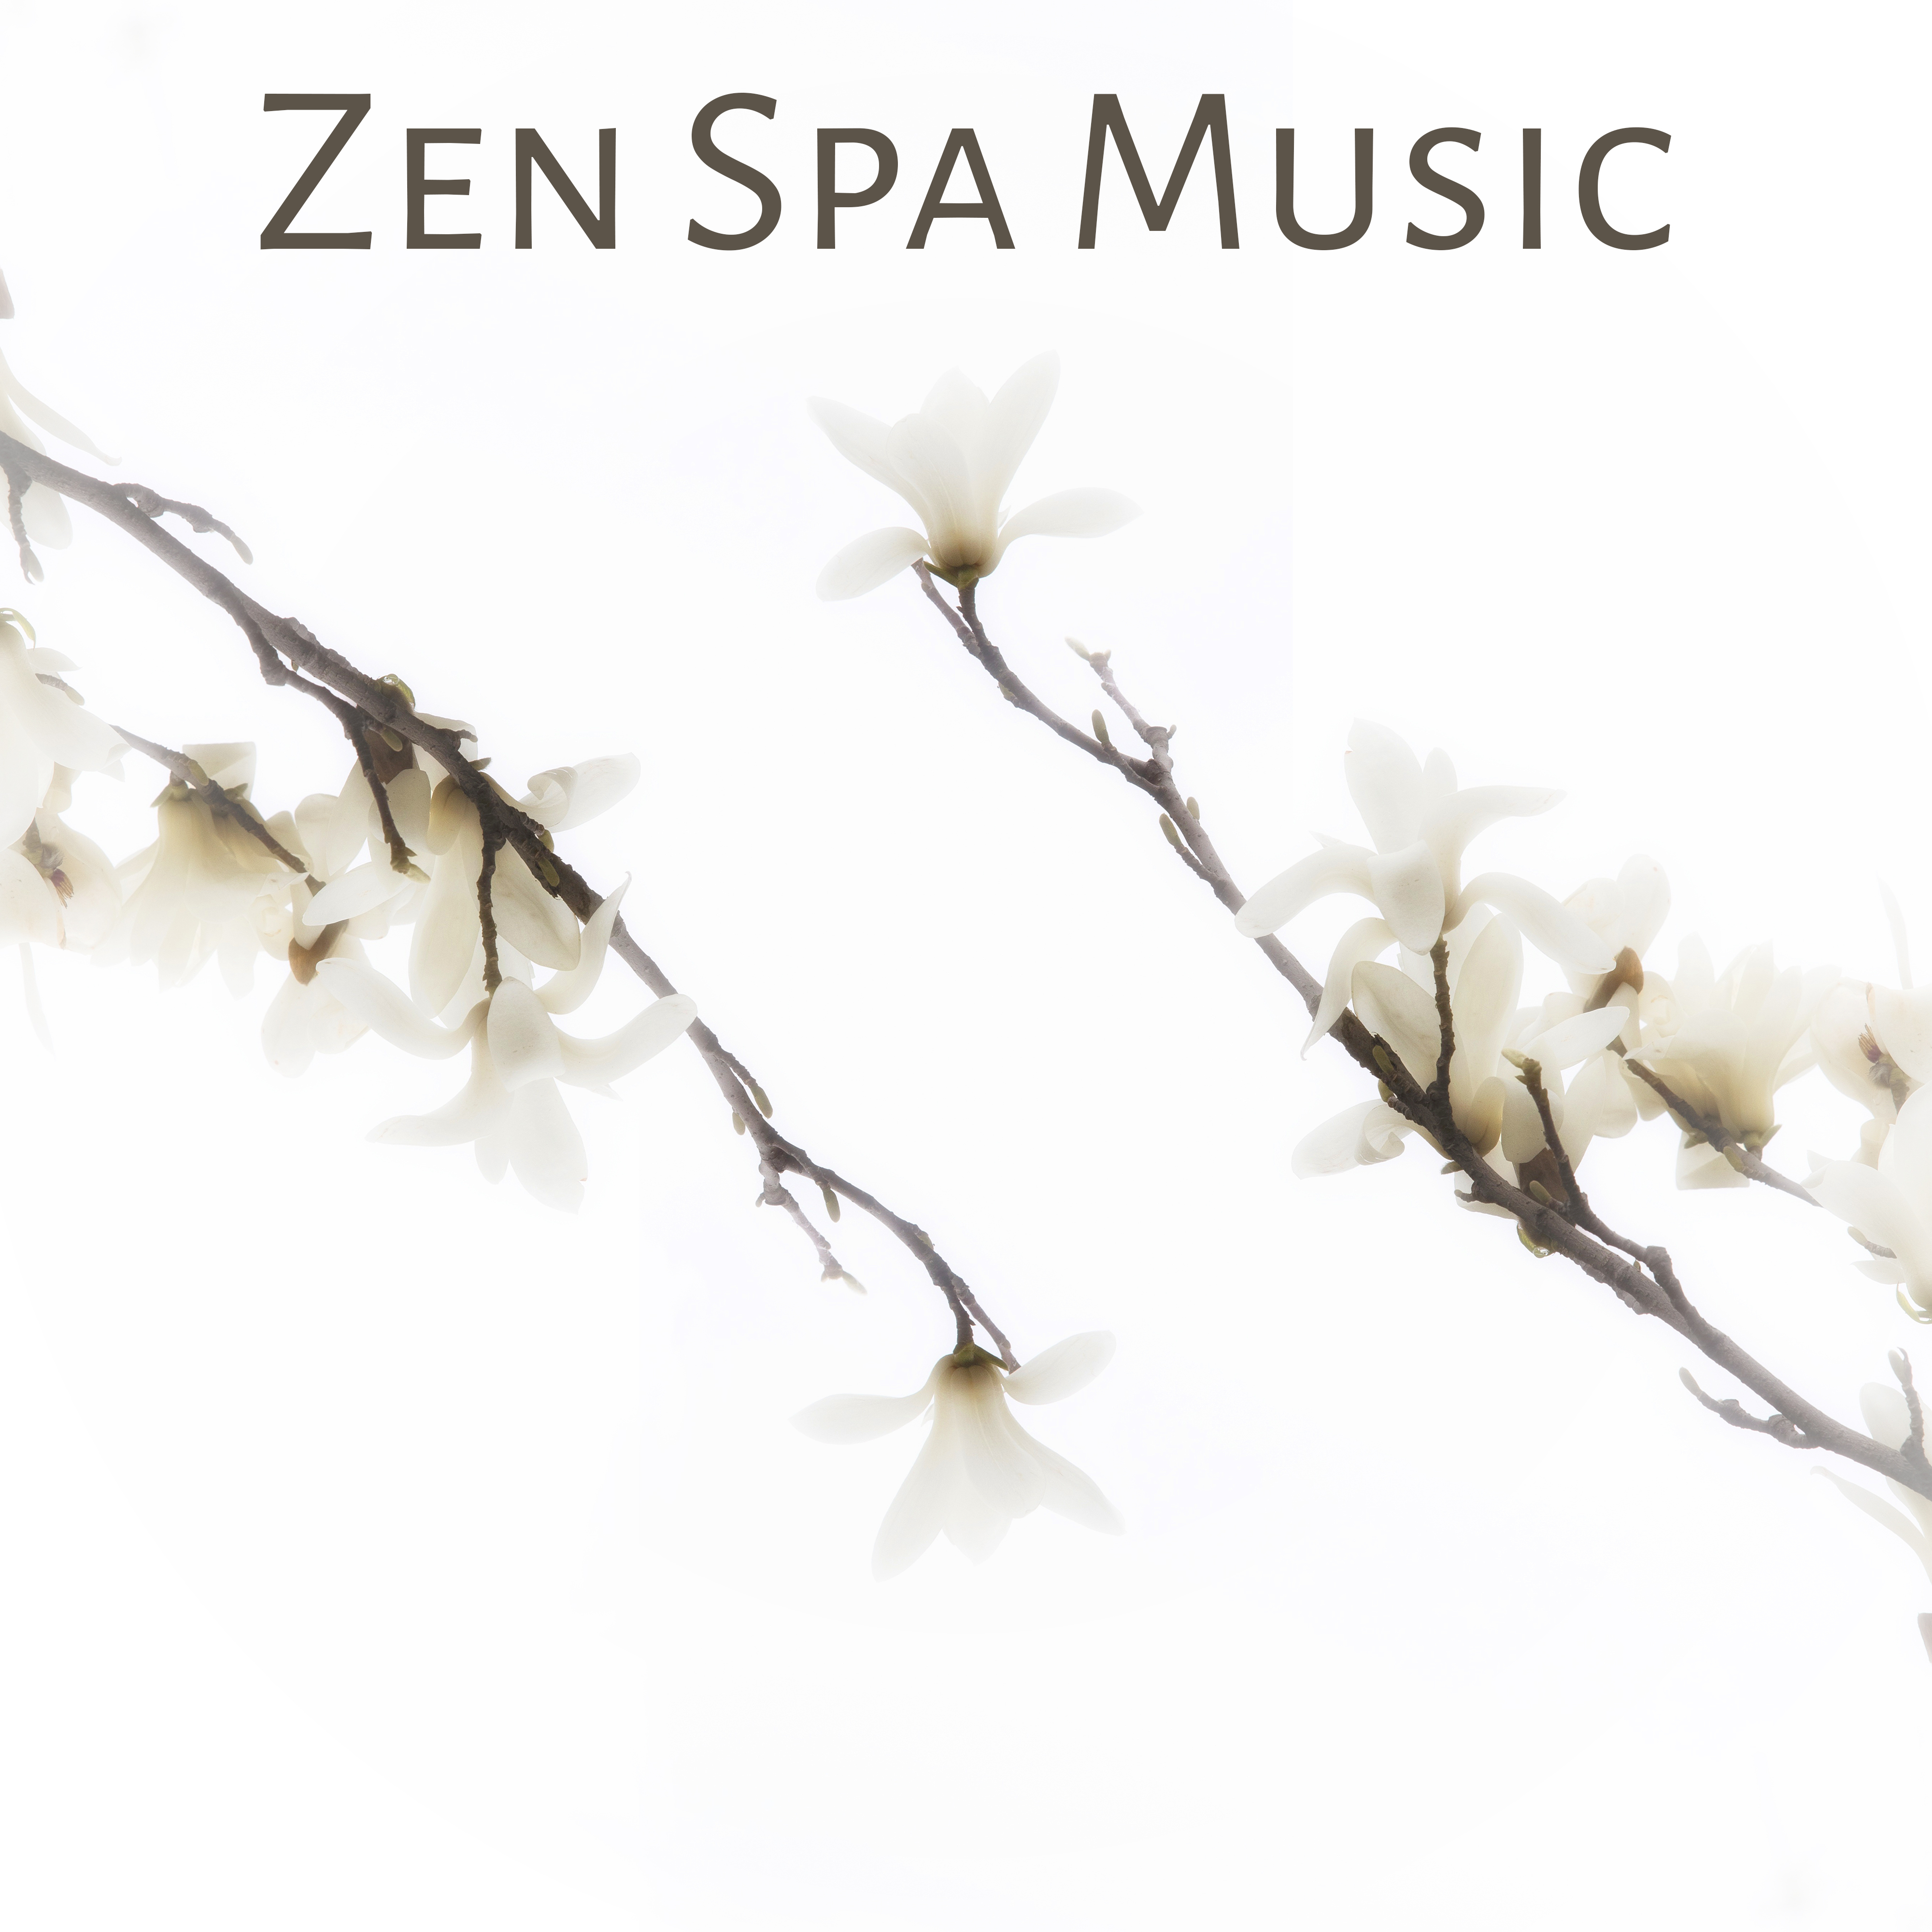 Zen Spa Music  Calming Sounds for Spa Relaxation, Beautiful Moments, Music to Help Rest, Nature Healing